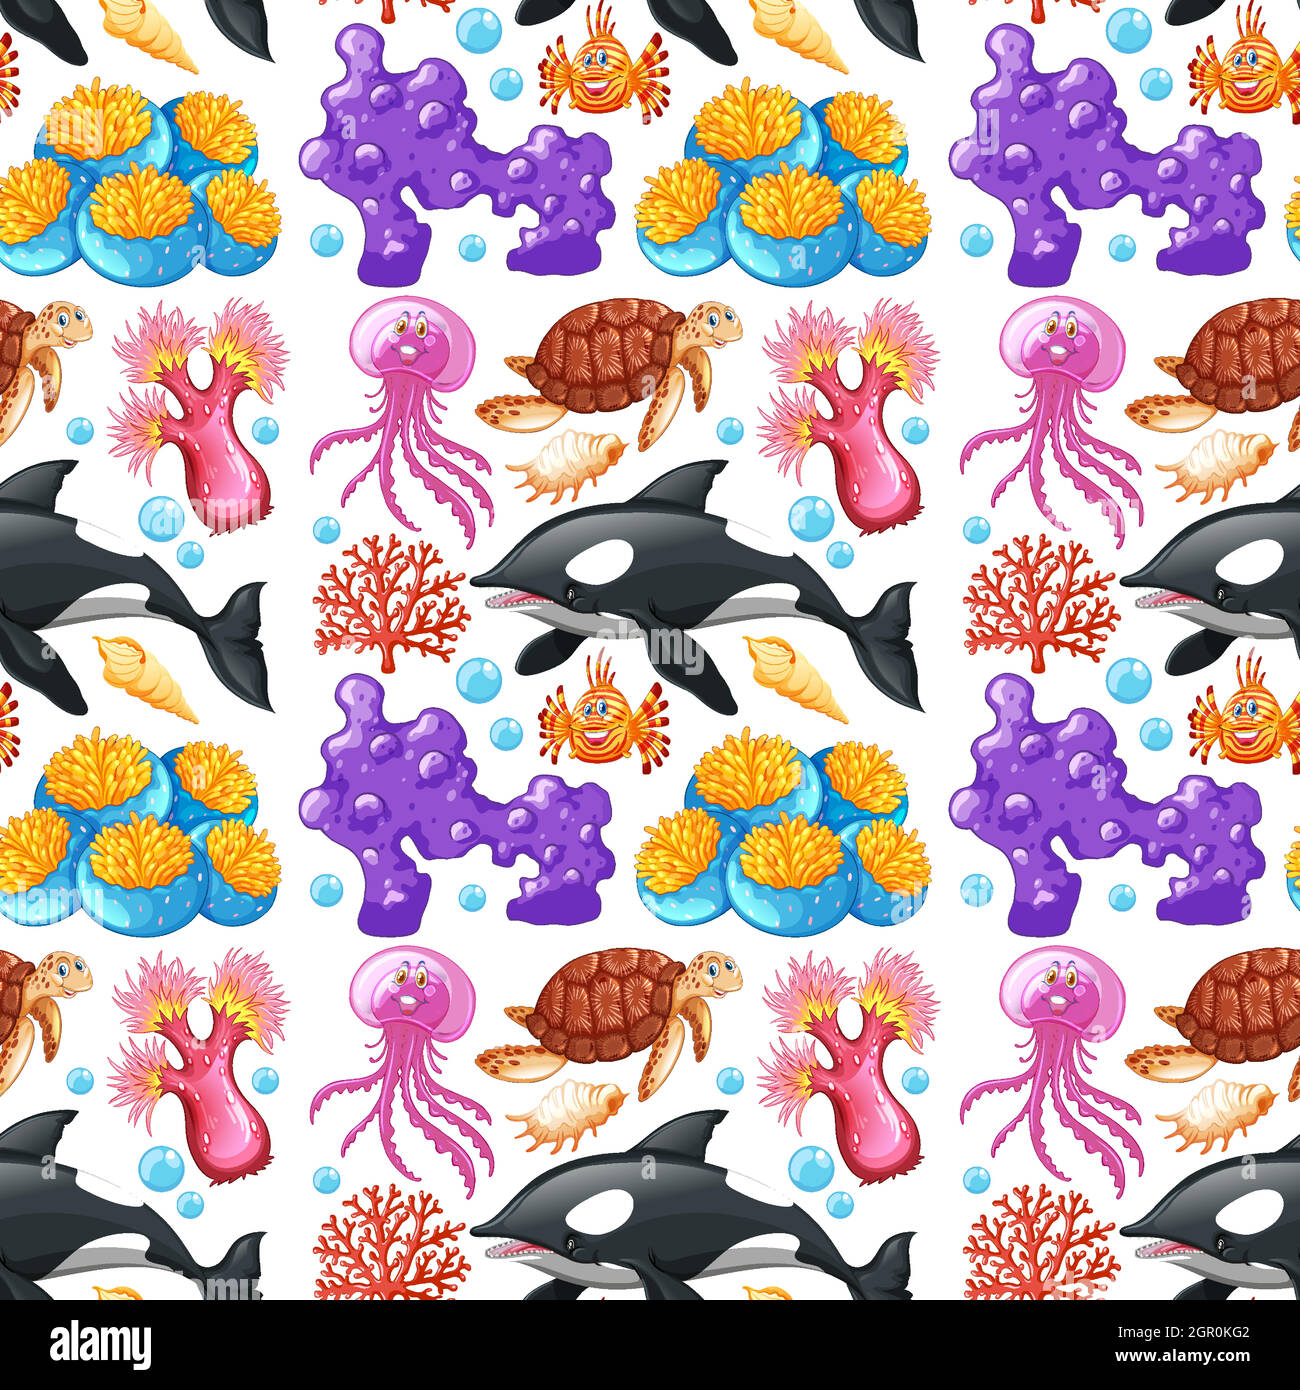 Seamless background design with sea creatures and coral Stock Vector